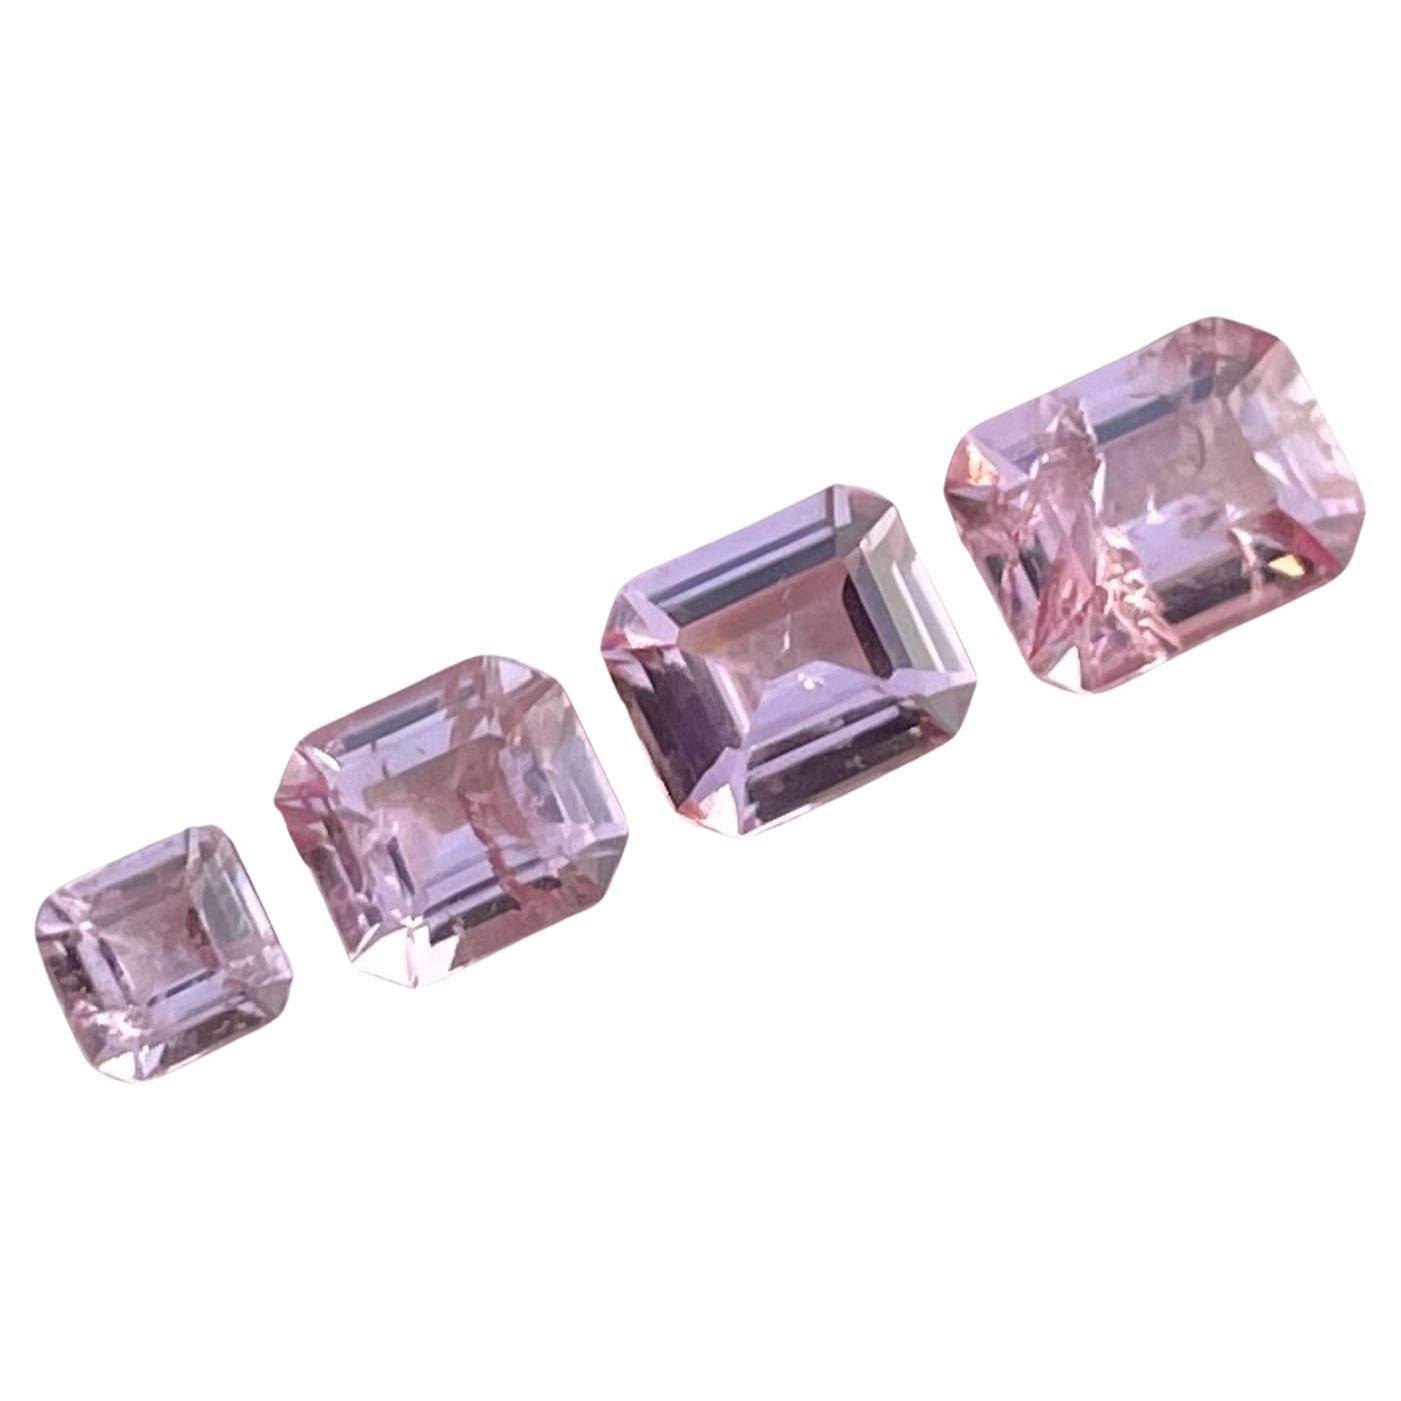 1.94 carats Pink Spinel Jewelry Batch Natural Loose Gemstones from Tajikistan